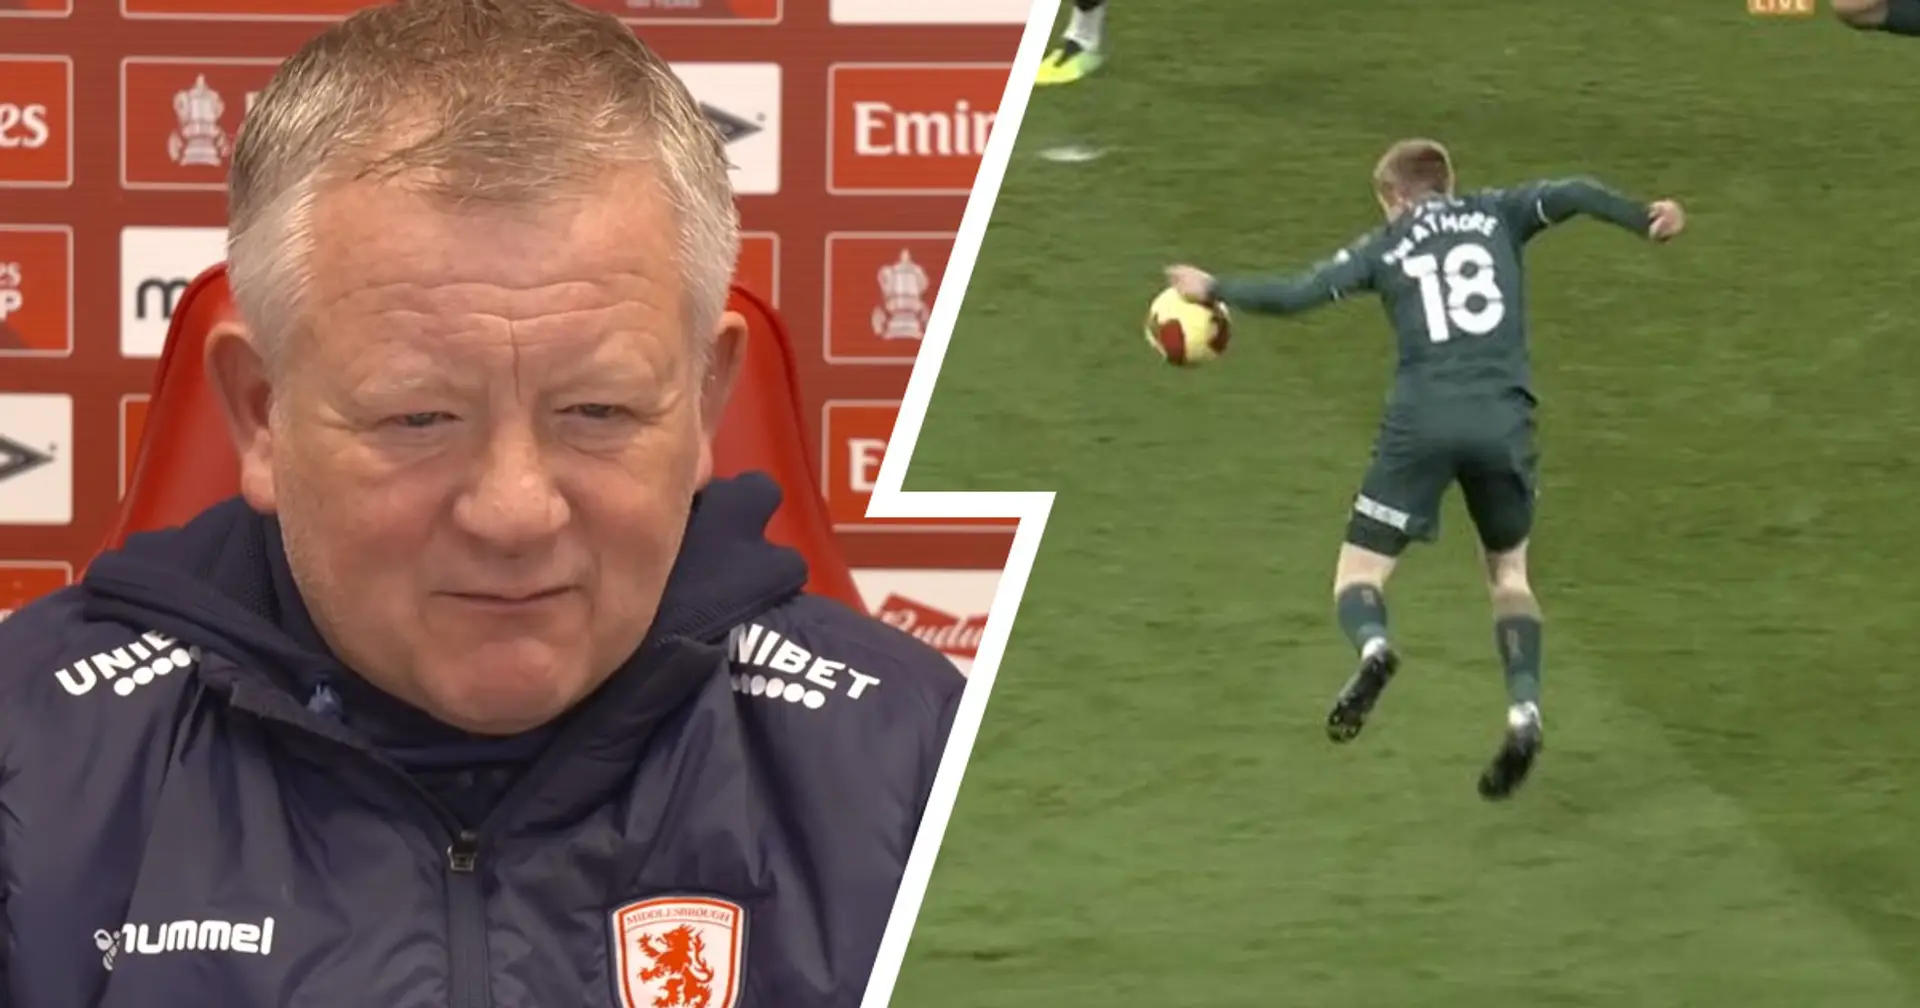 'I thought straight away it was handball': Middlesbrough manager Wilder gives honest thoughts on controversial equalizer